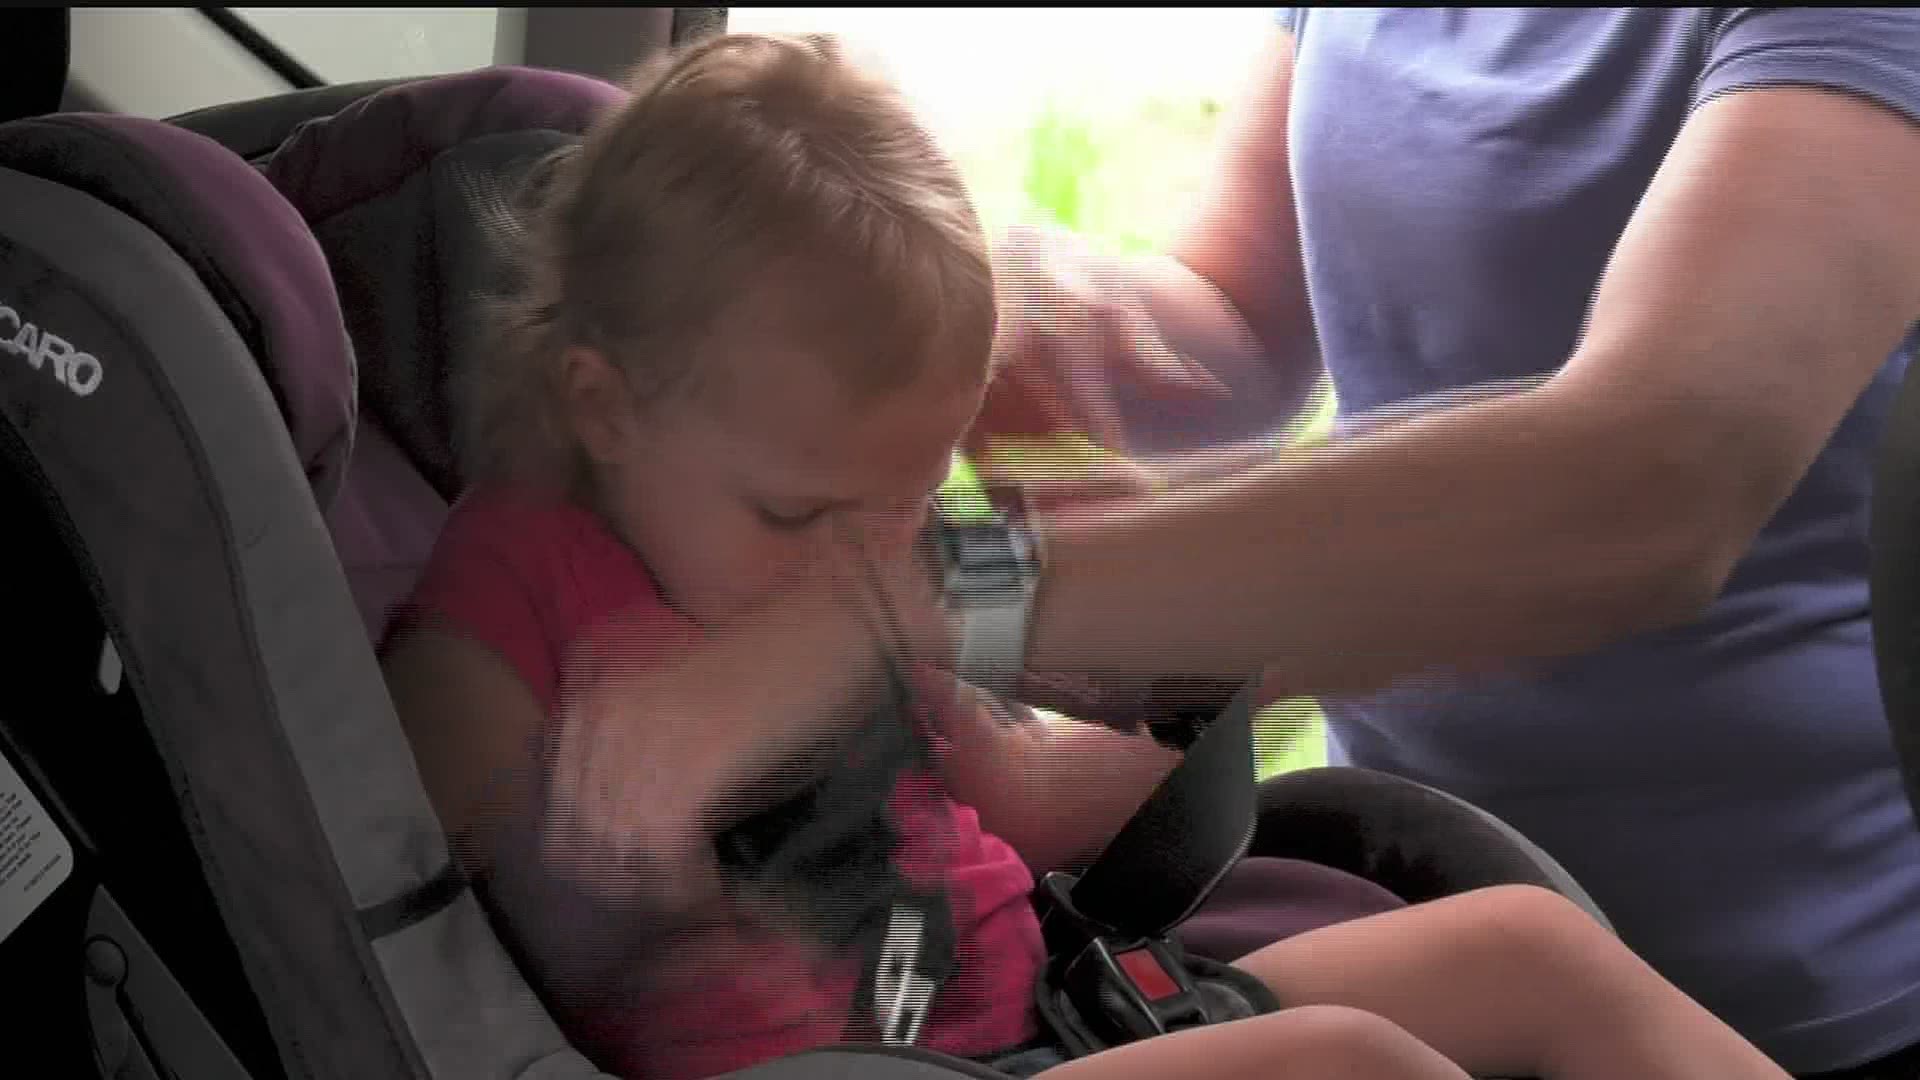 It's National Heat Stroke Prevention Month, and during this hot weather, medical professionals are reminding people not to leave their kids in hot cars